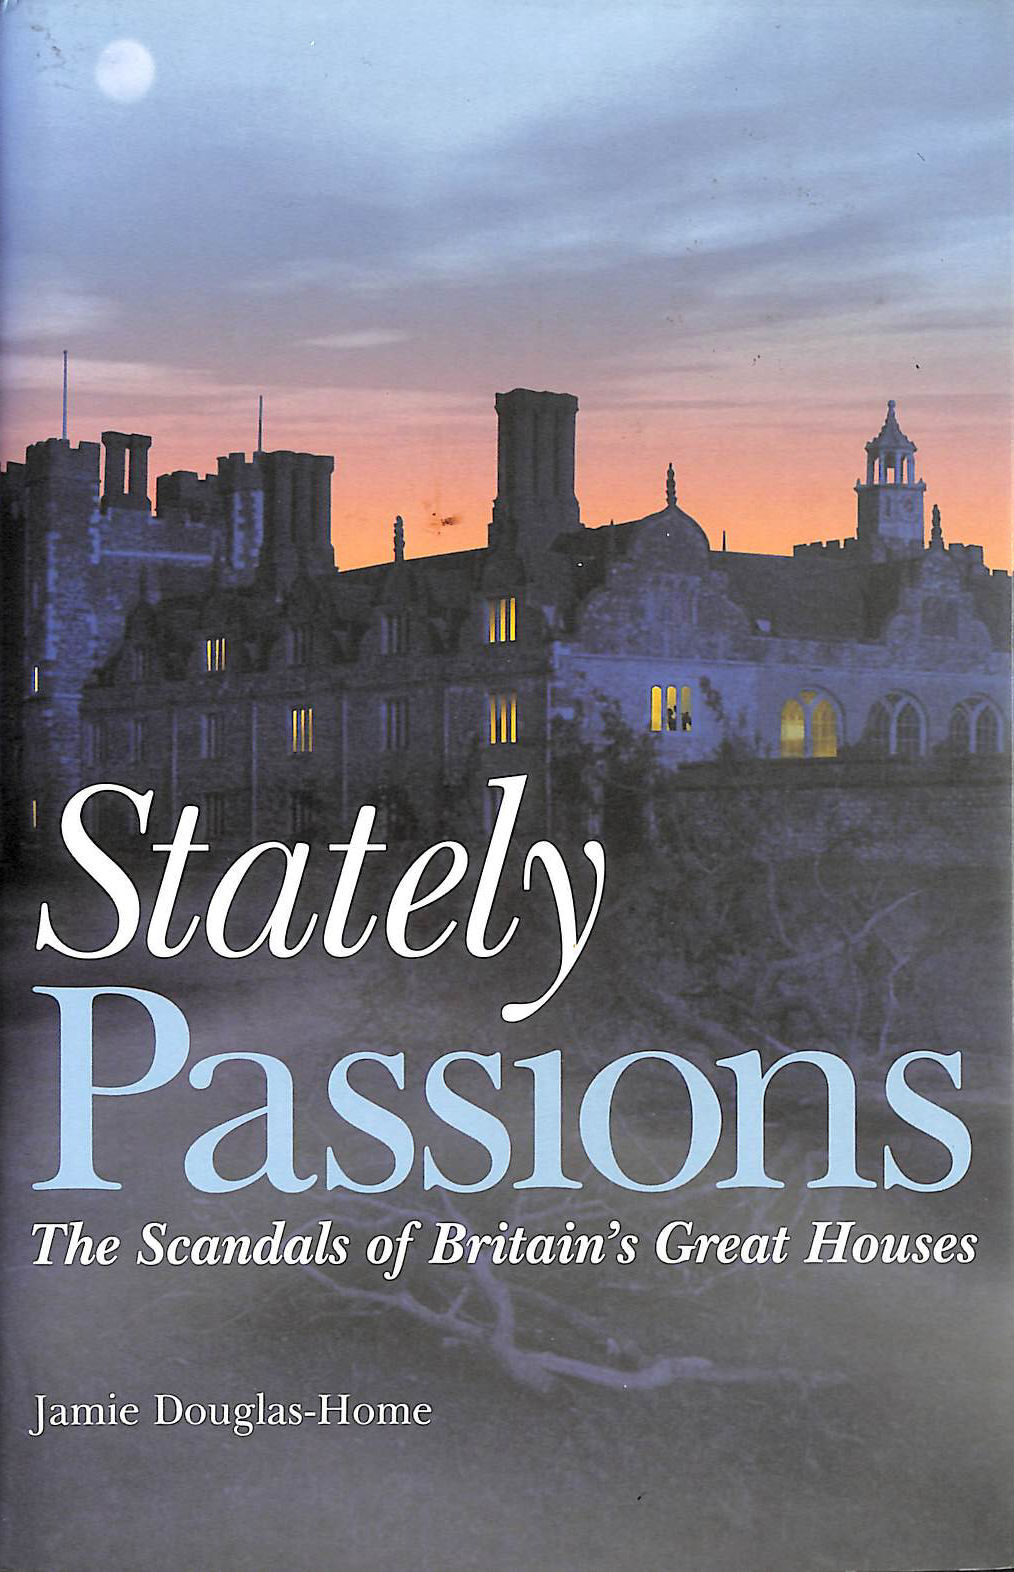 JAMIE DOUGLAS-HOME - Stately Passions: The Scandals of Britain's Great Houses